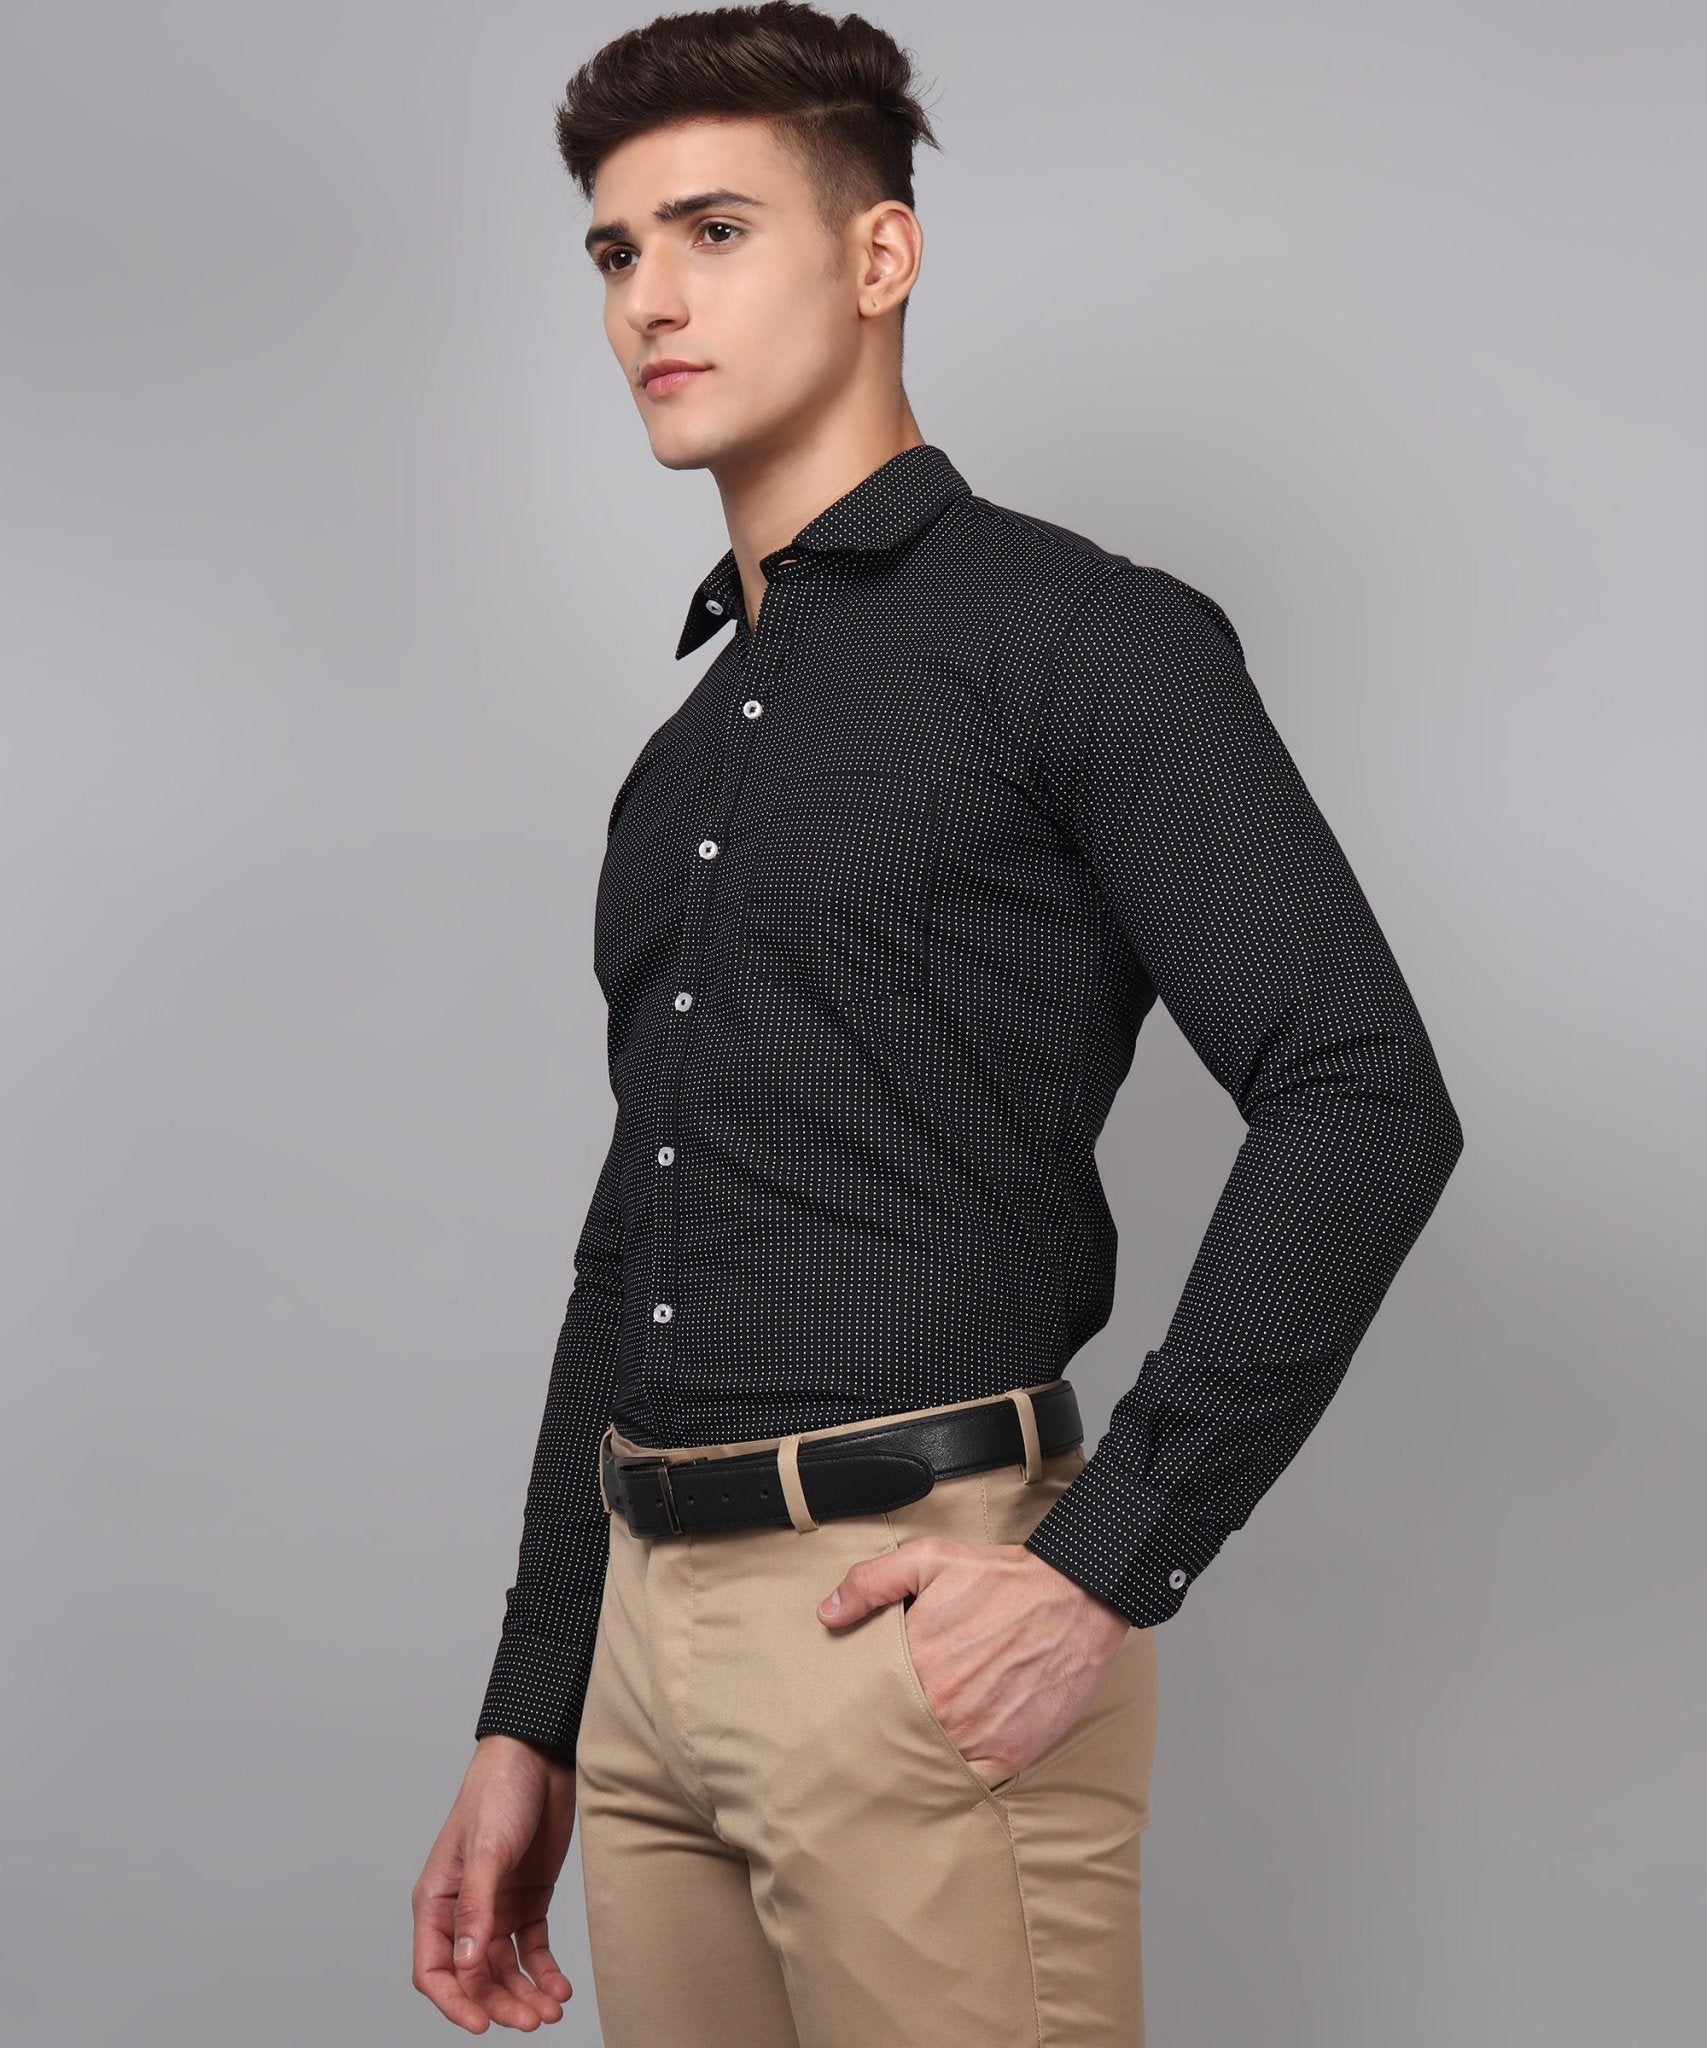 TryBuy Premium Pure Cotton Dot Printed Casual/Formal Black Shirt for Men - TryBuy® USA🇺🇸